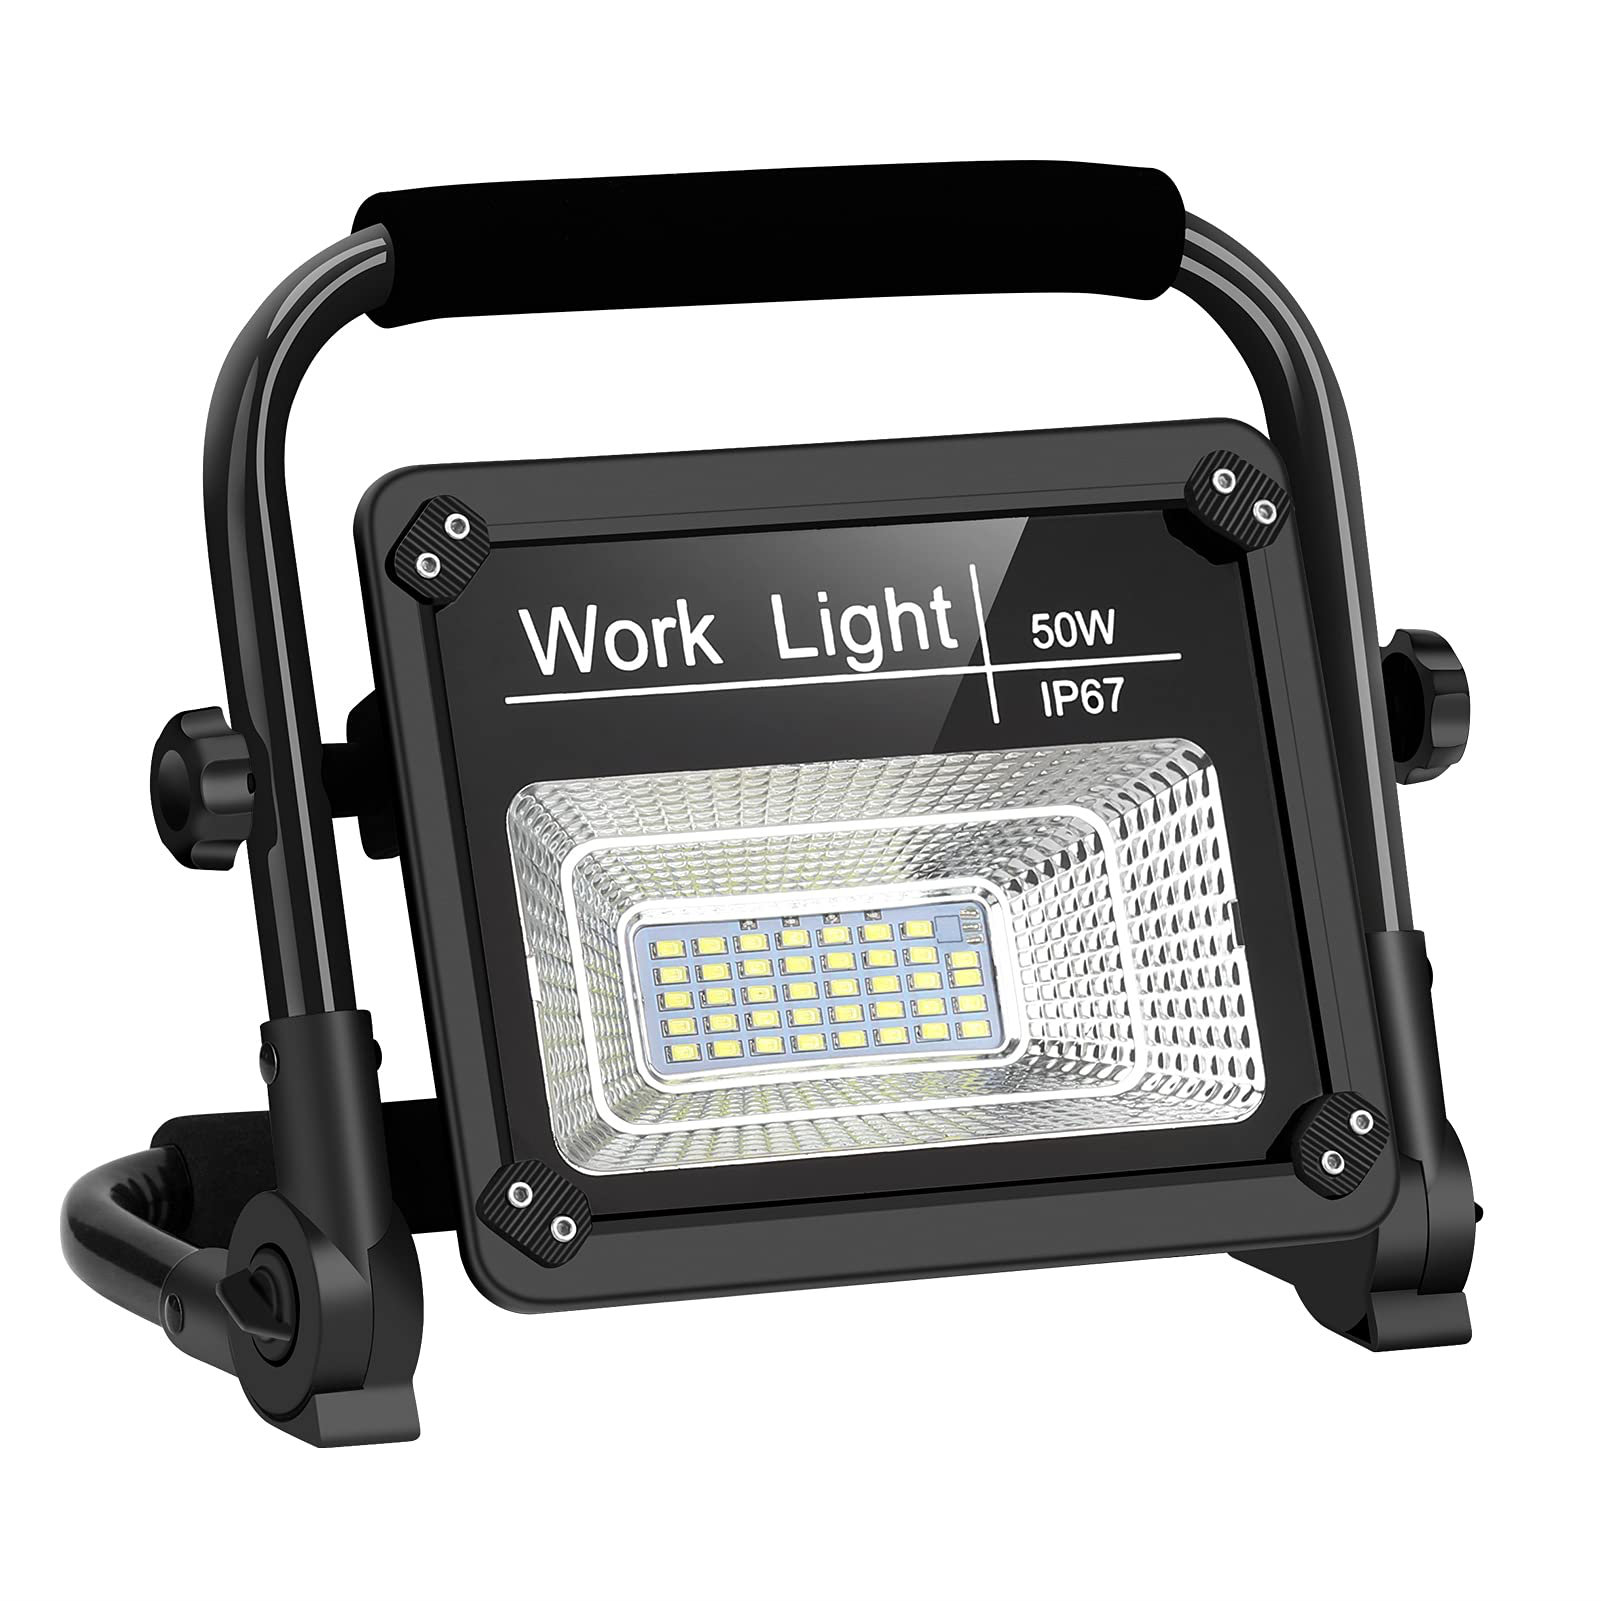 50w Portable LED work light Rechargeable COB floodlight with bracket Camping 